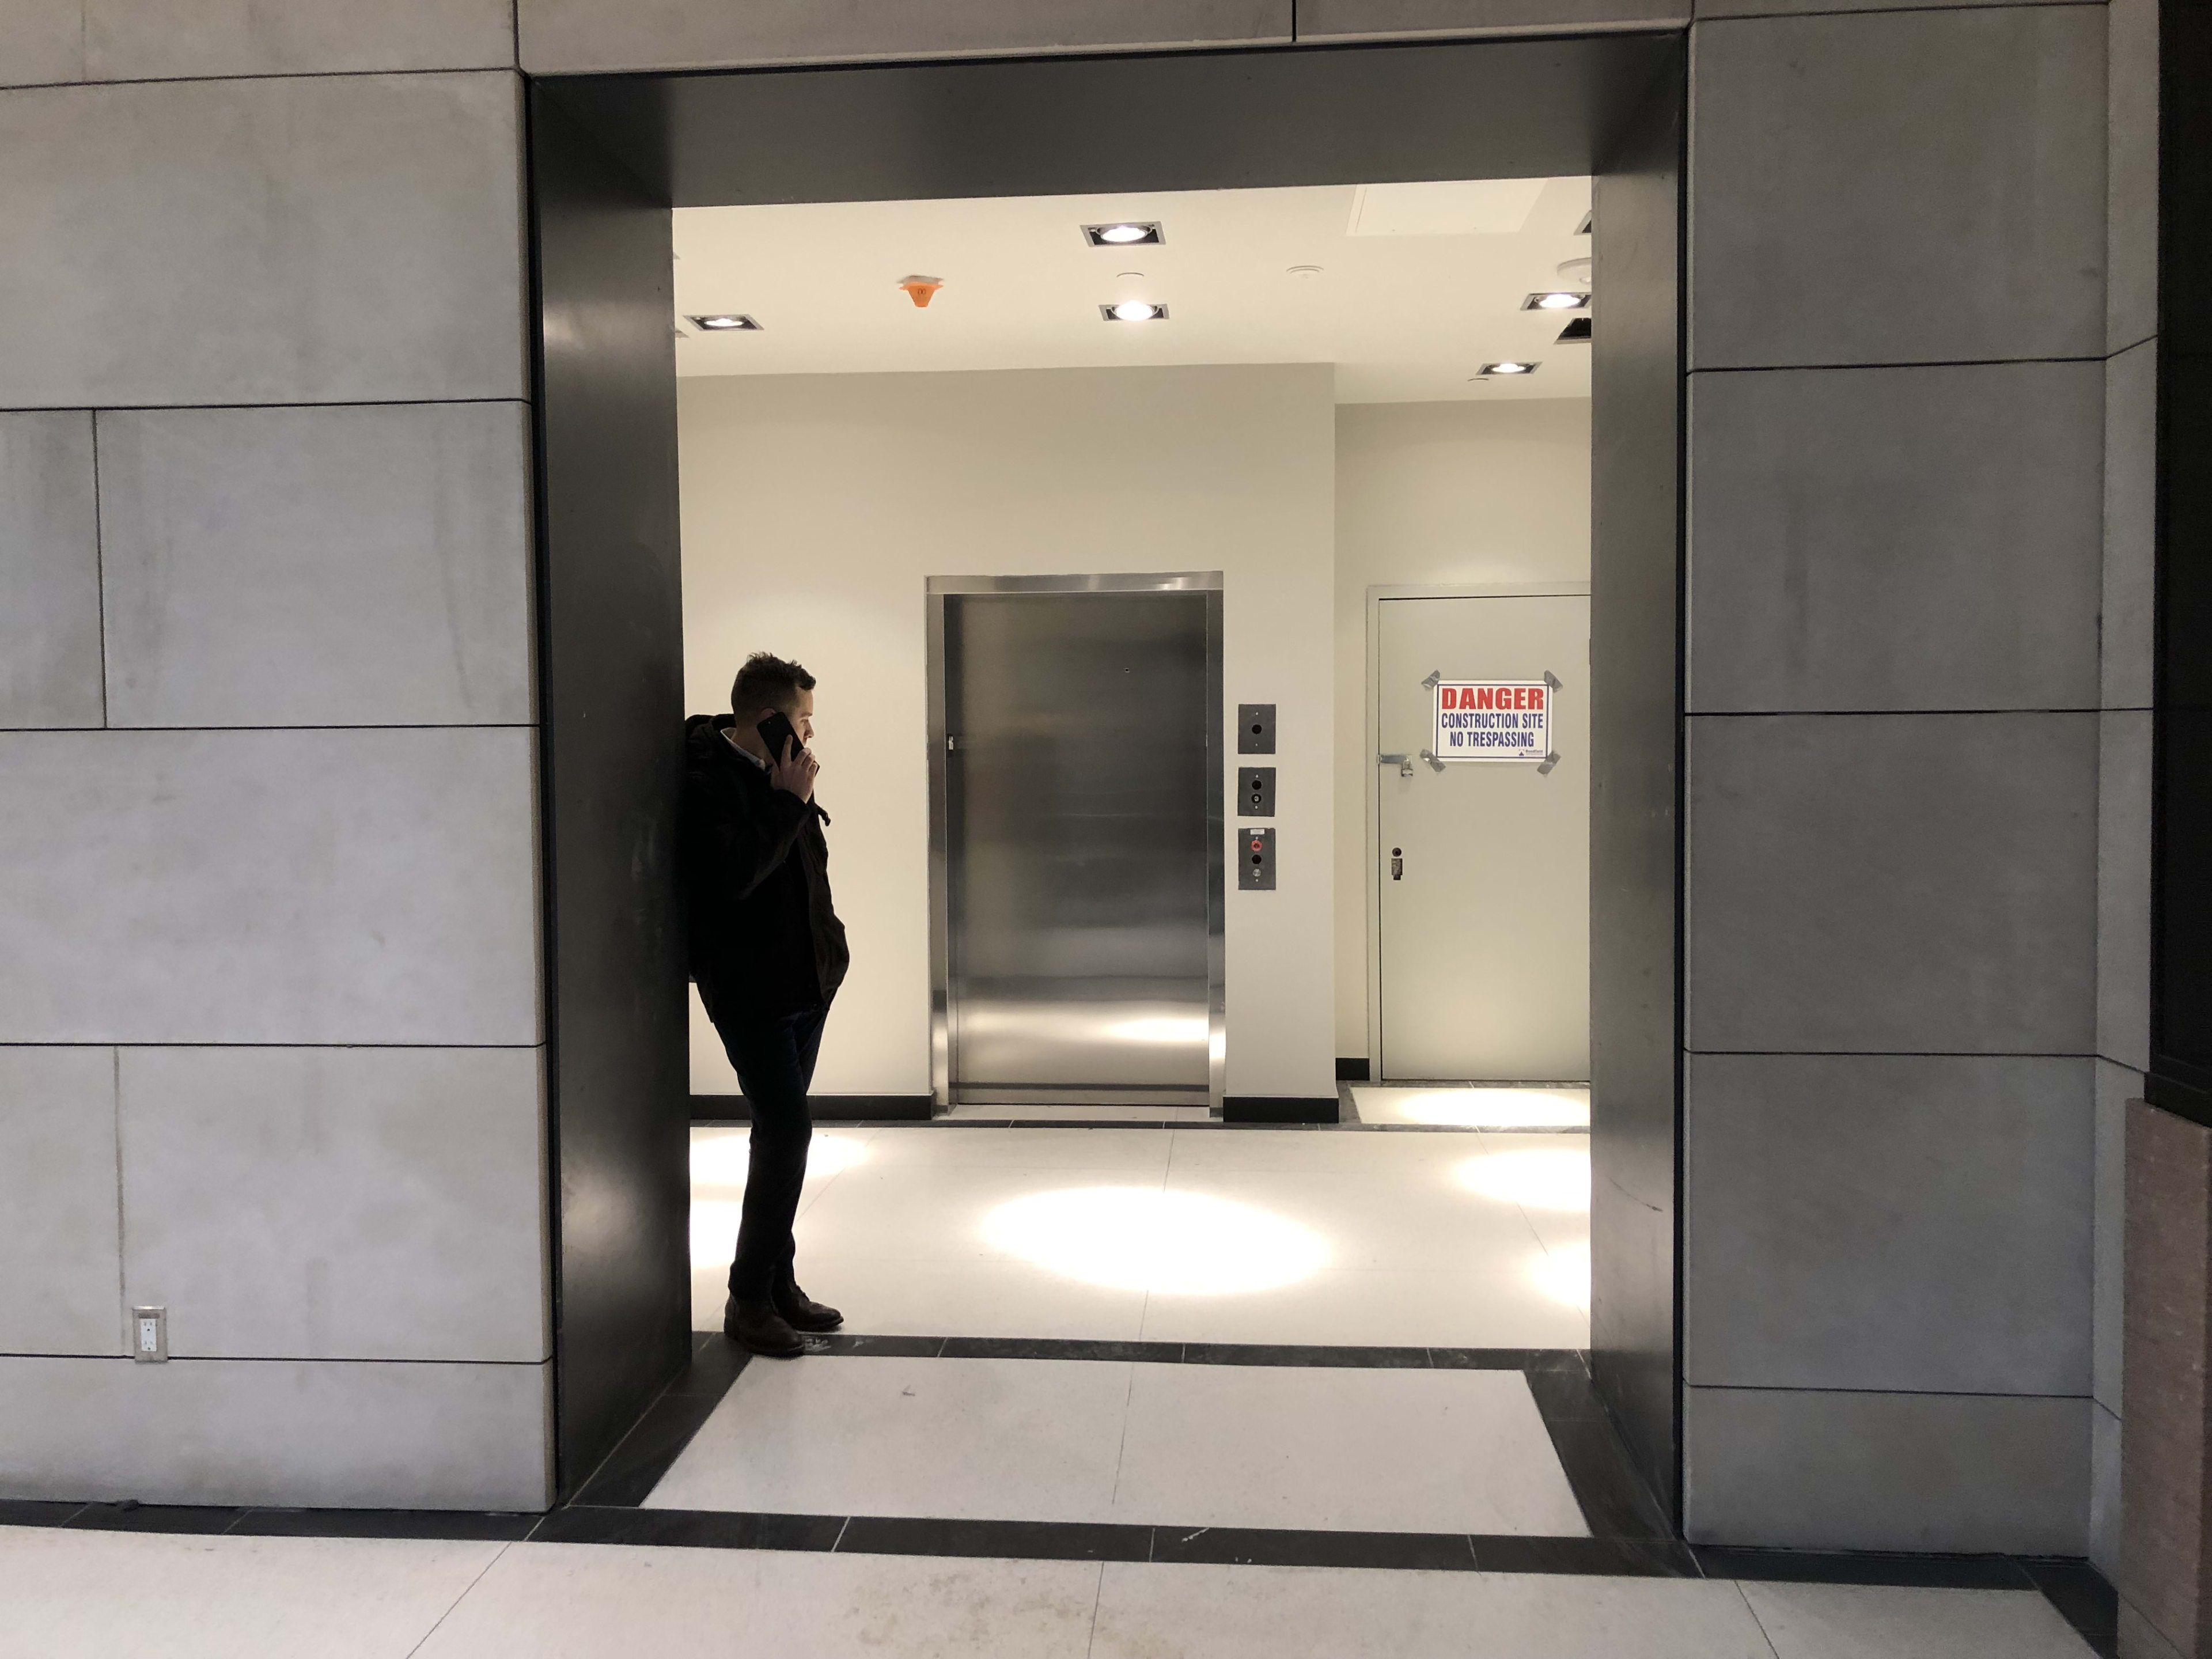 A man talks on the phone next to an elevator.